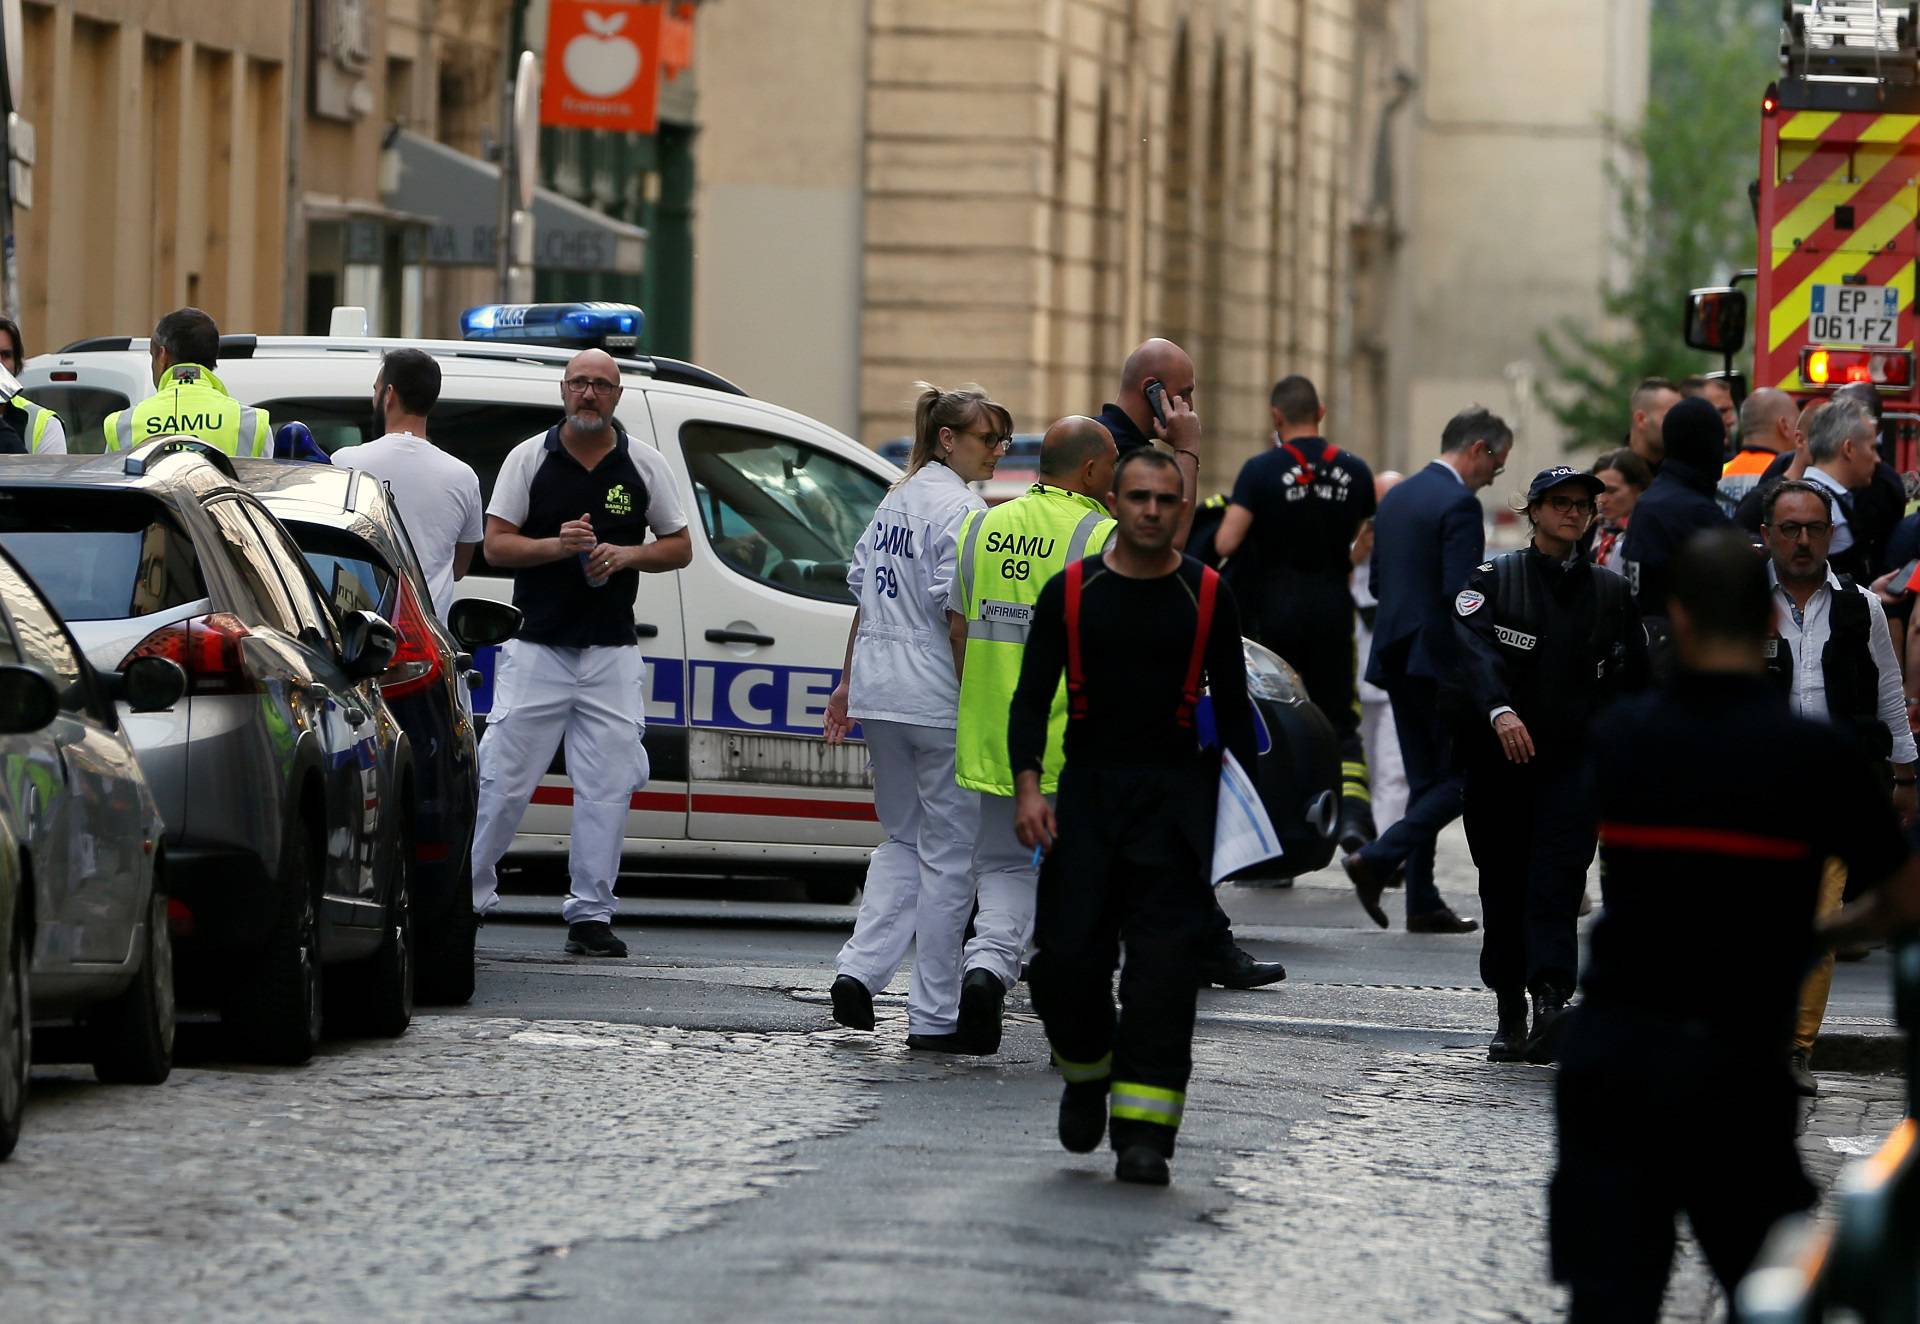 Police officers, fire fighters and medics are seen near the site of a suspected bomb attack in central Lyon